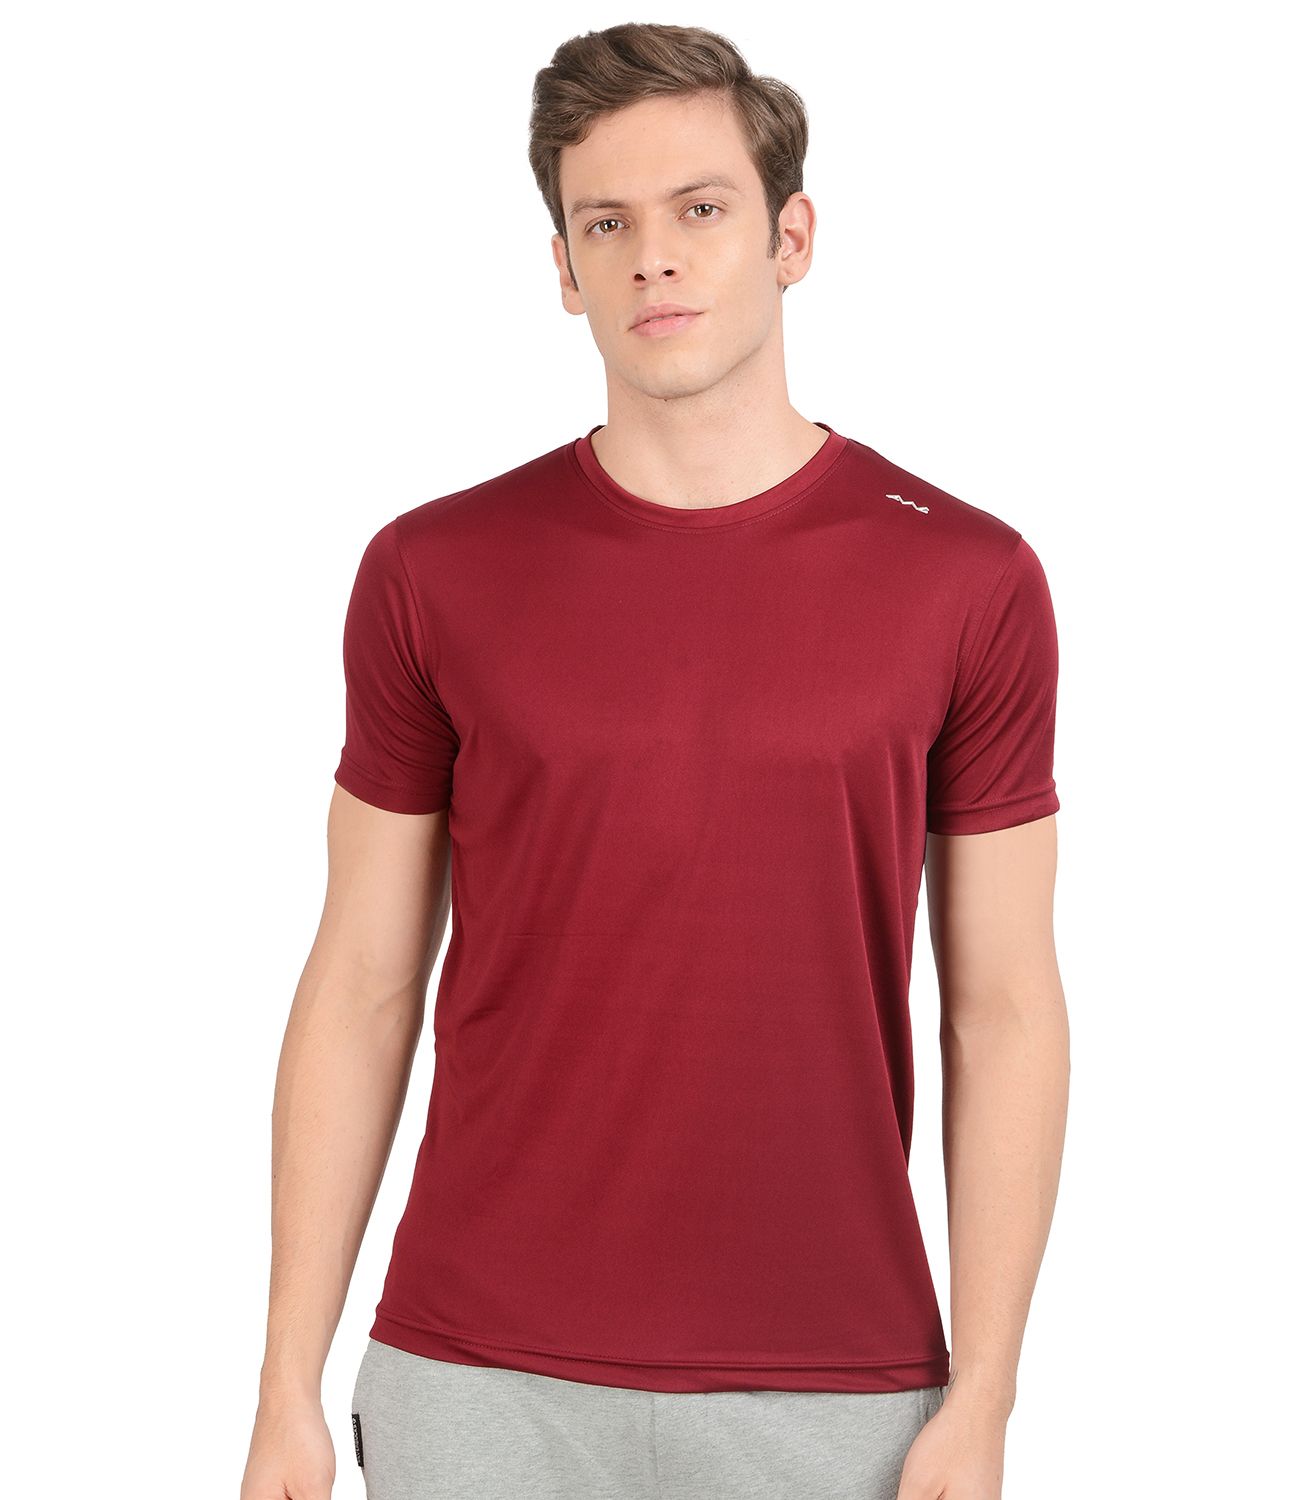 AWG DRY FIT T-SHIRT